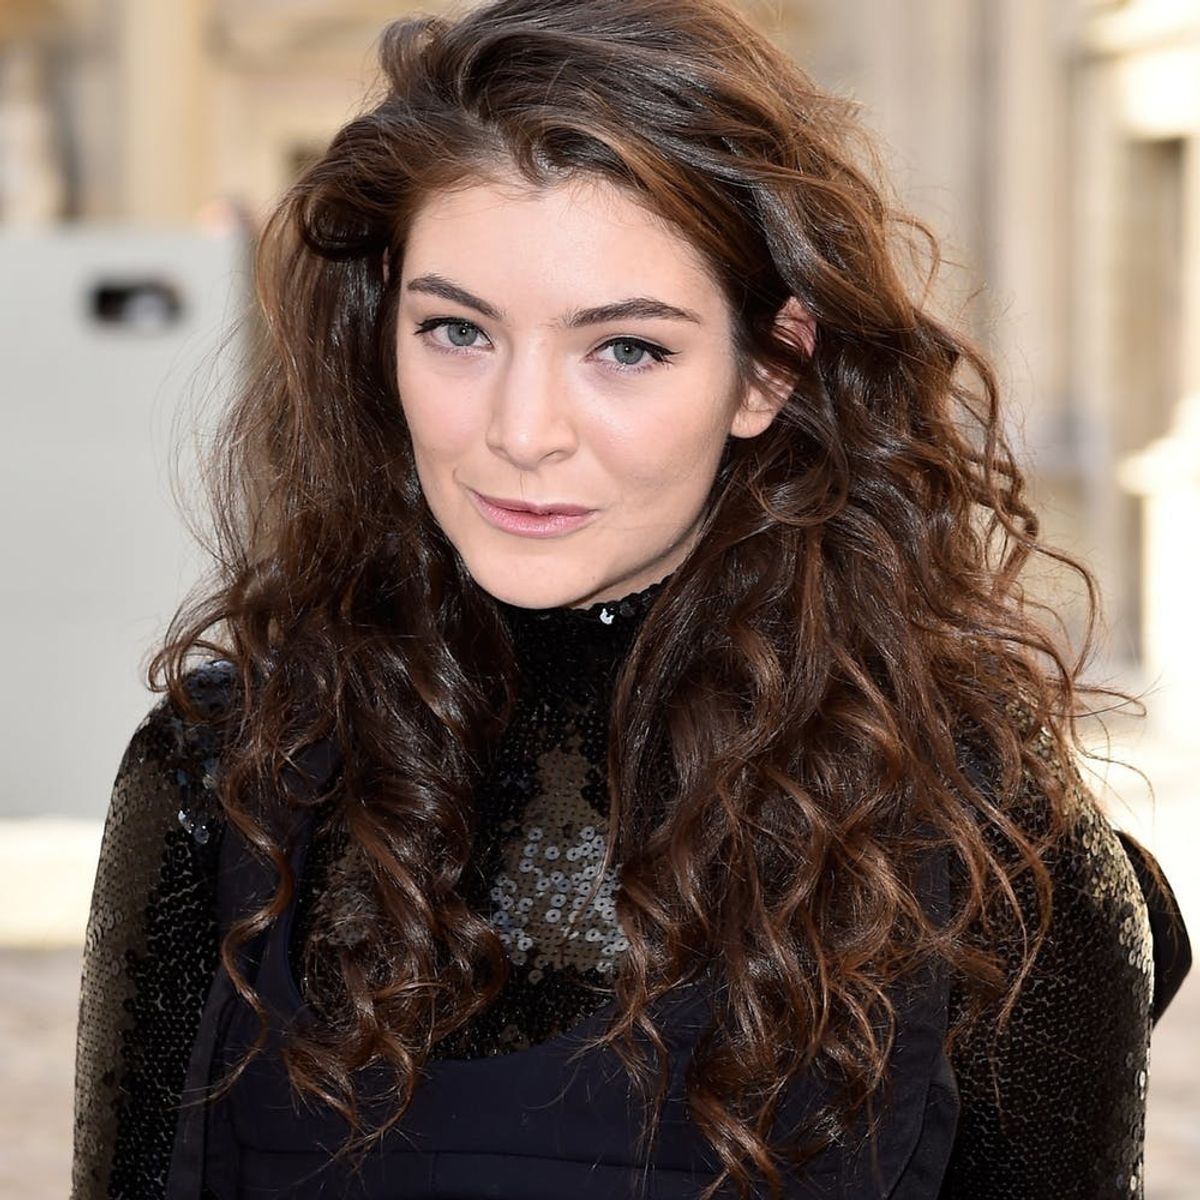 Lorde’s New Hairstyle Is a Major Style Transformation